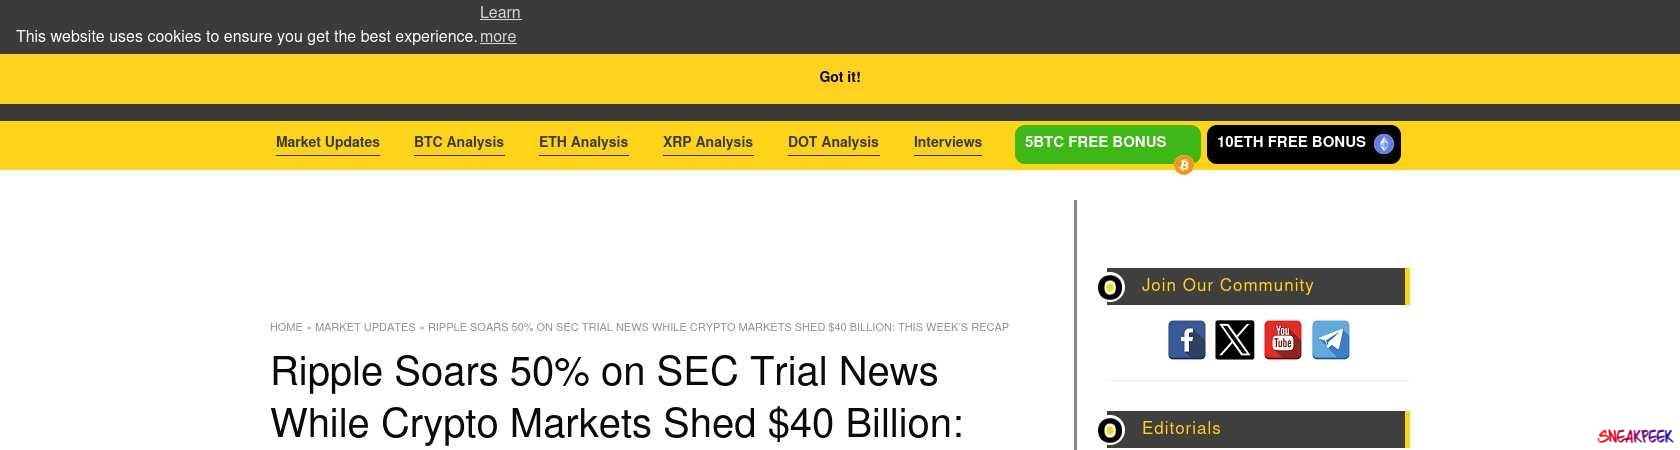 Read the full Article:  ⭲ Ripple Soars 50% on SEC Trial News While Crypto Markets Shed $40 Billion: This Week’s Recap